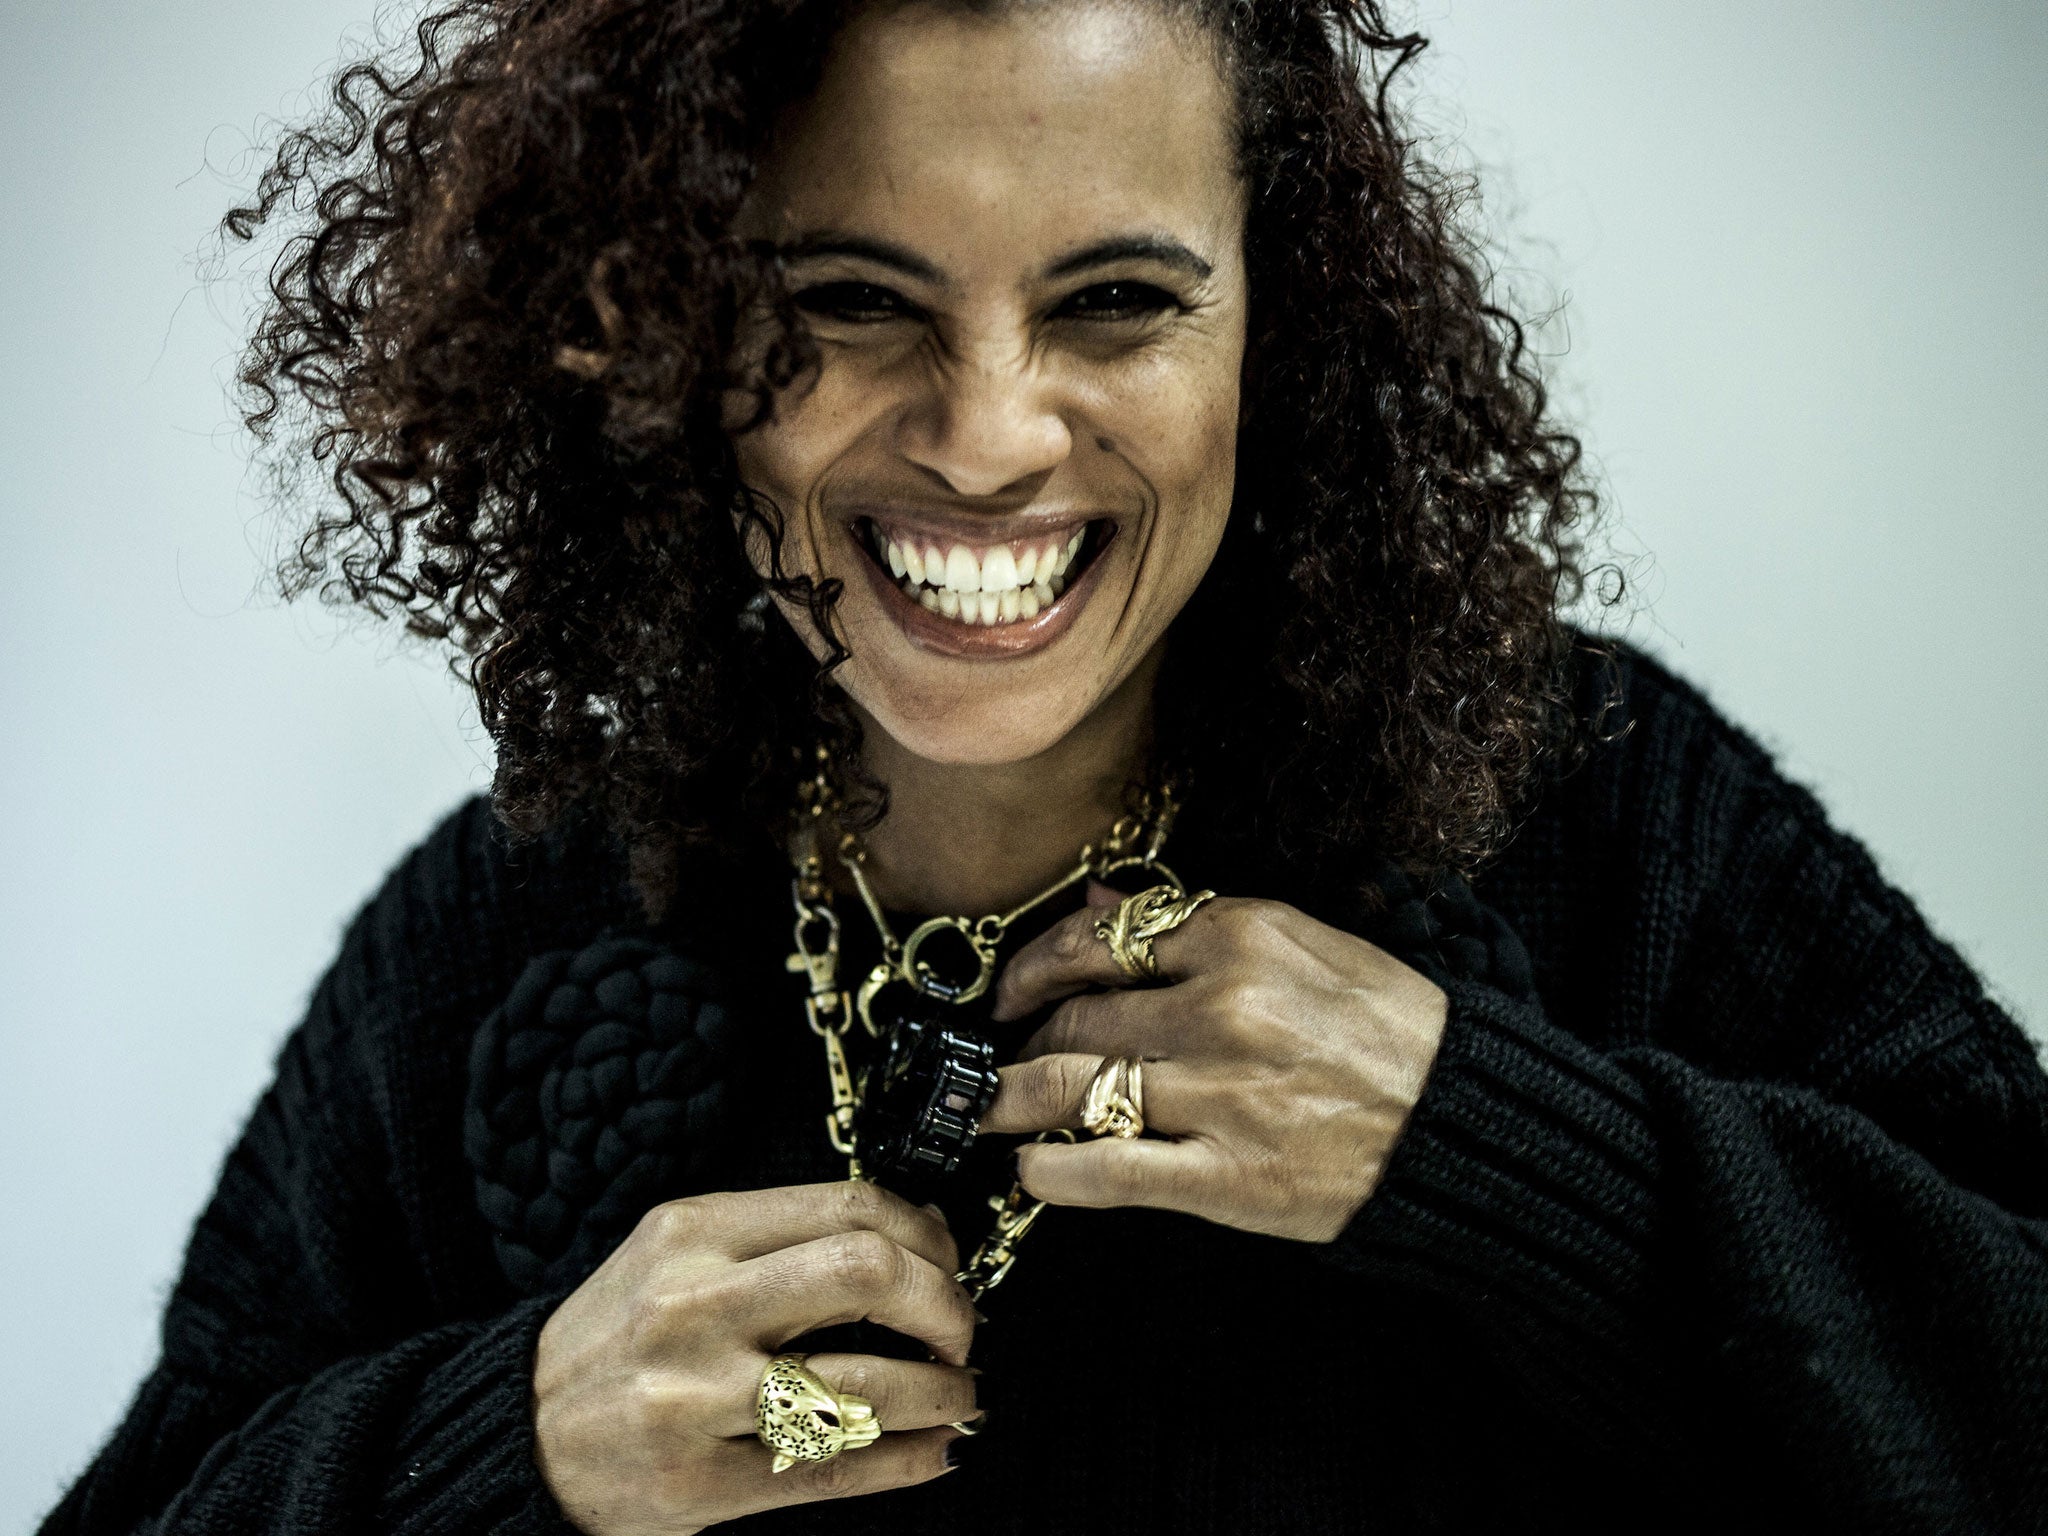 Neneh Cherry is the latest addition to the Field Day 2014 line-up